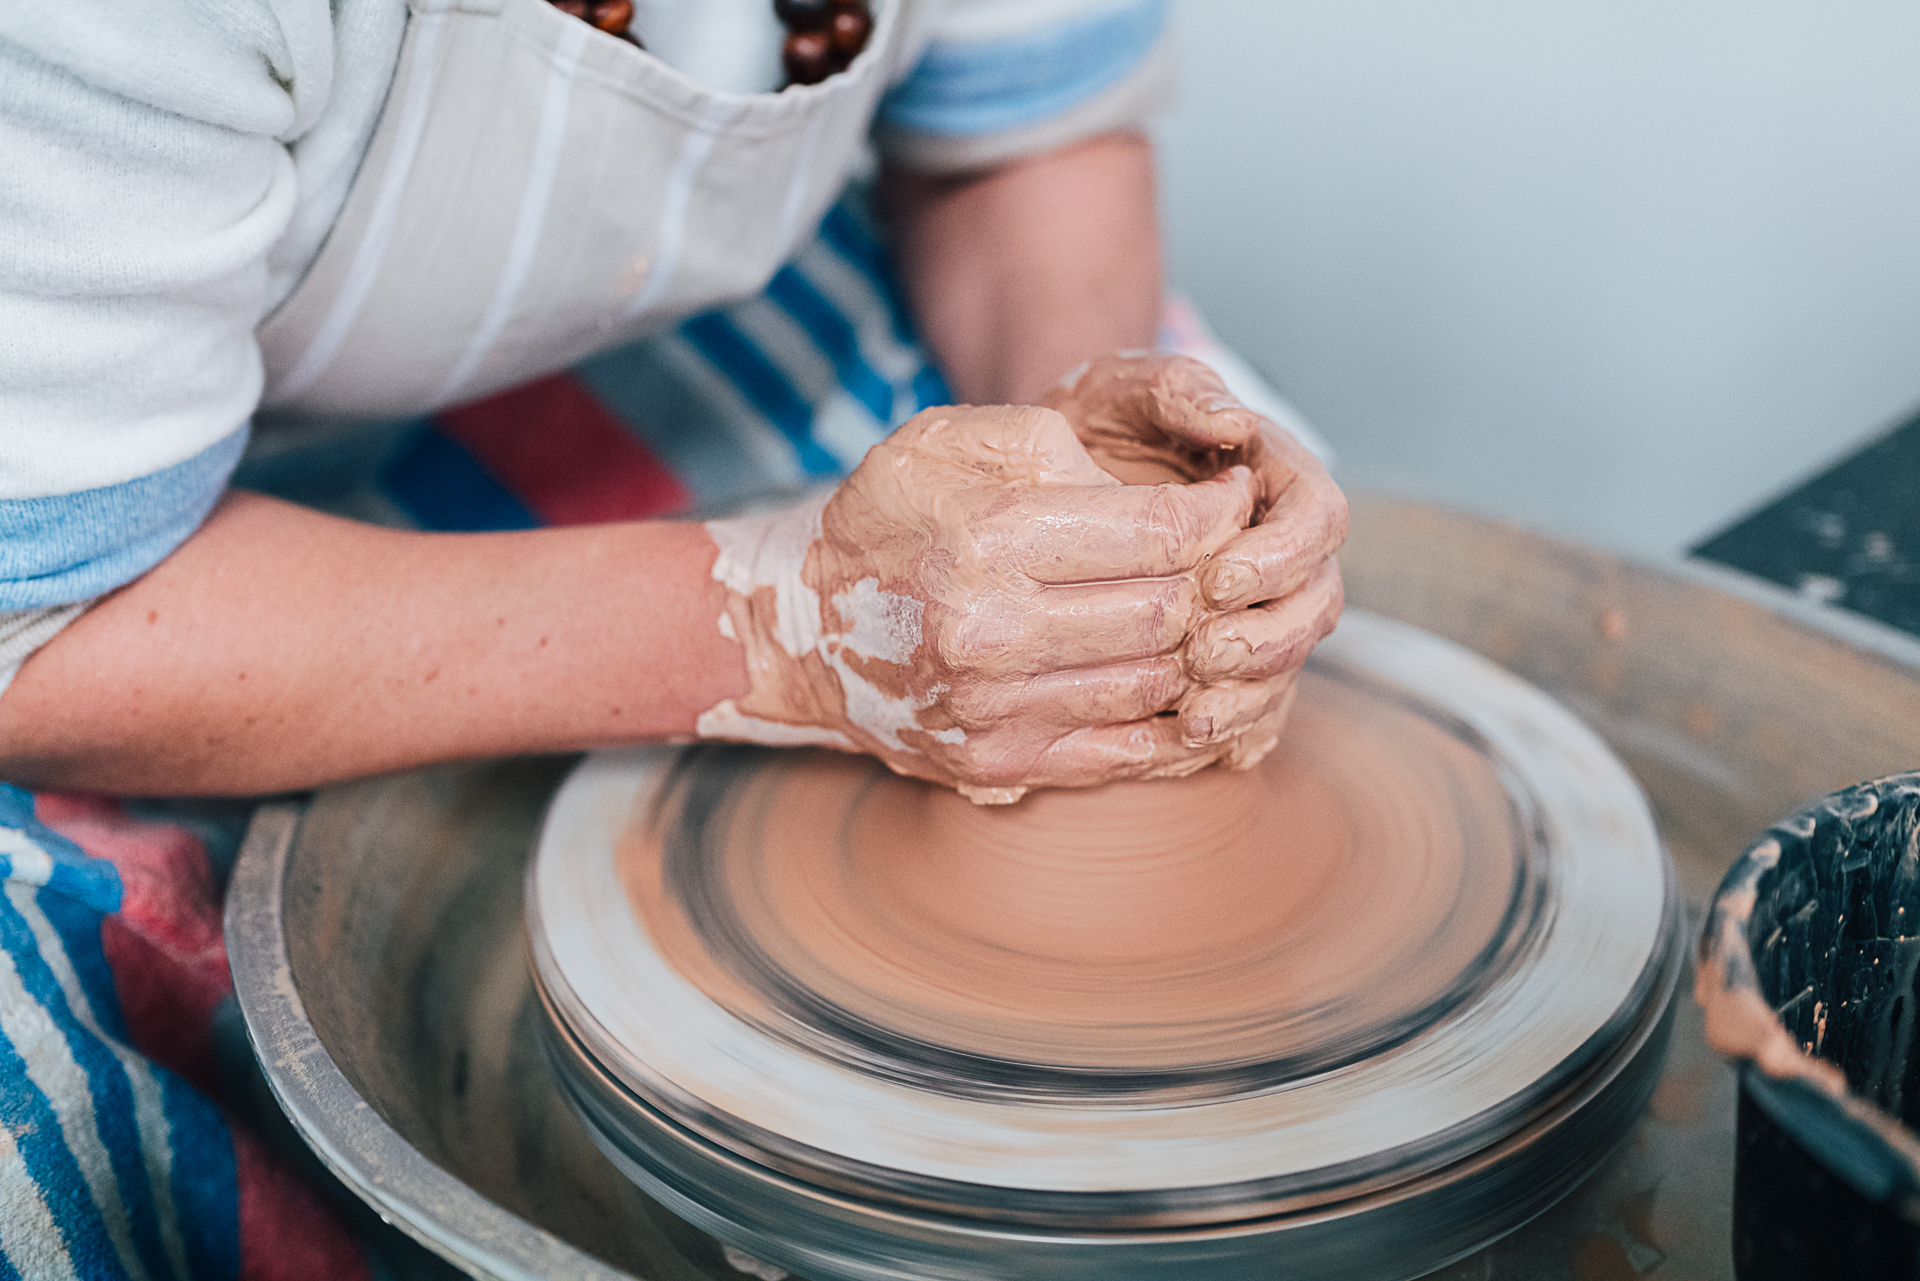 Person wearing white jumper and blue, red and white striped apron leaning over a pottery wheel, shaping red earth coloured clay.